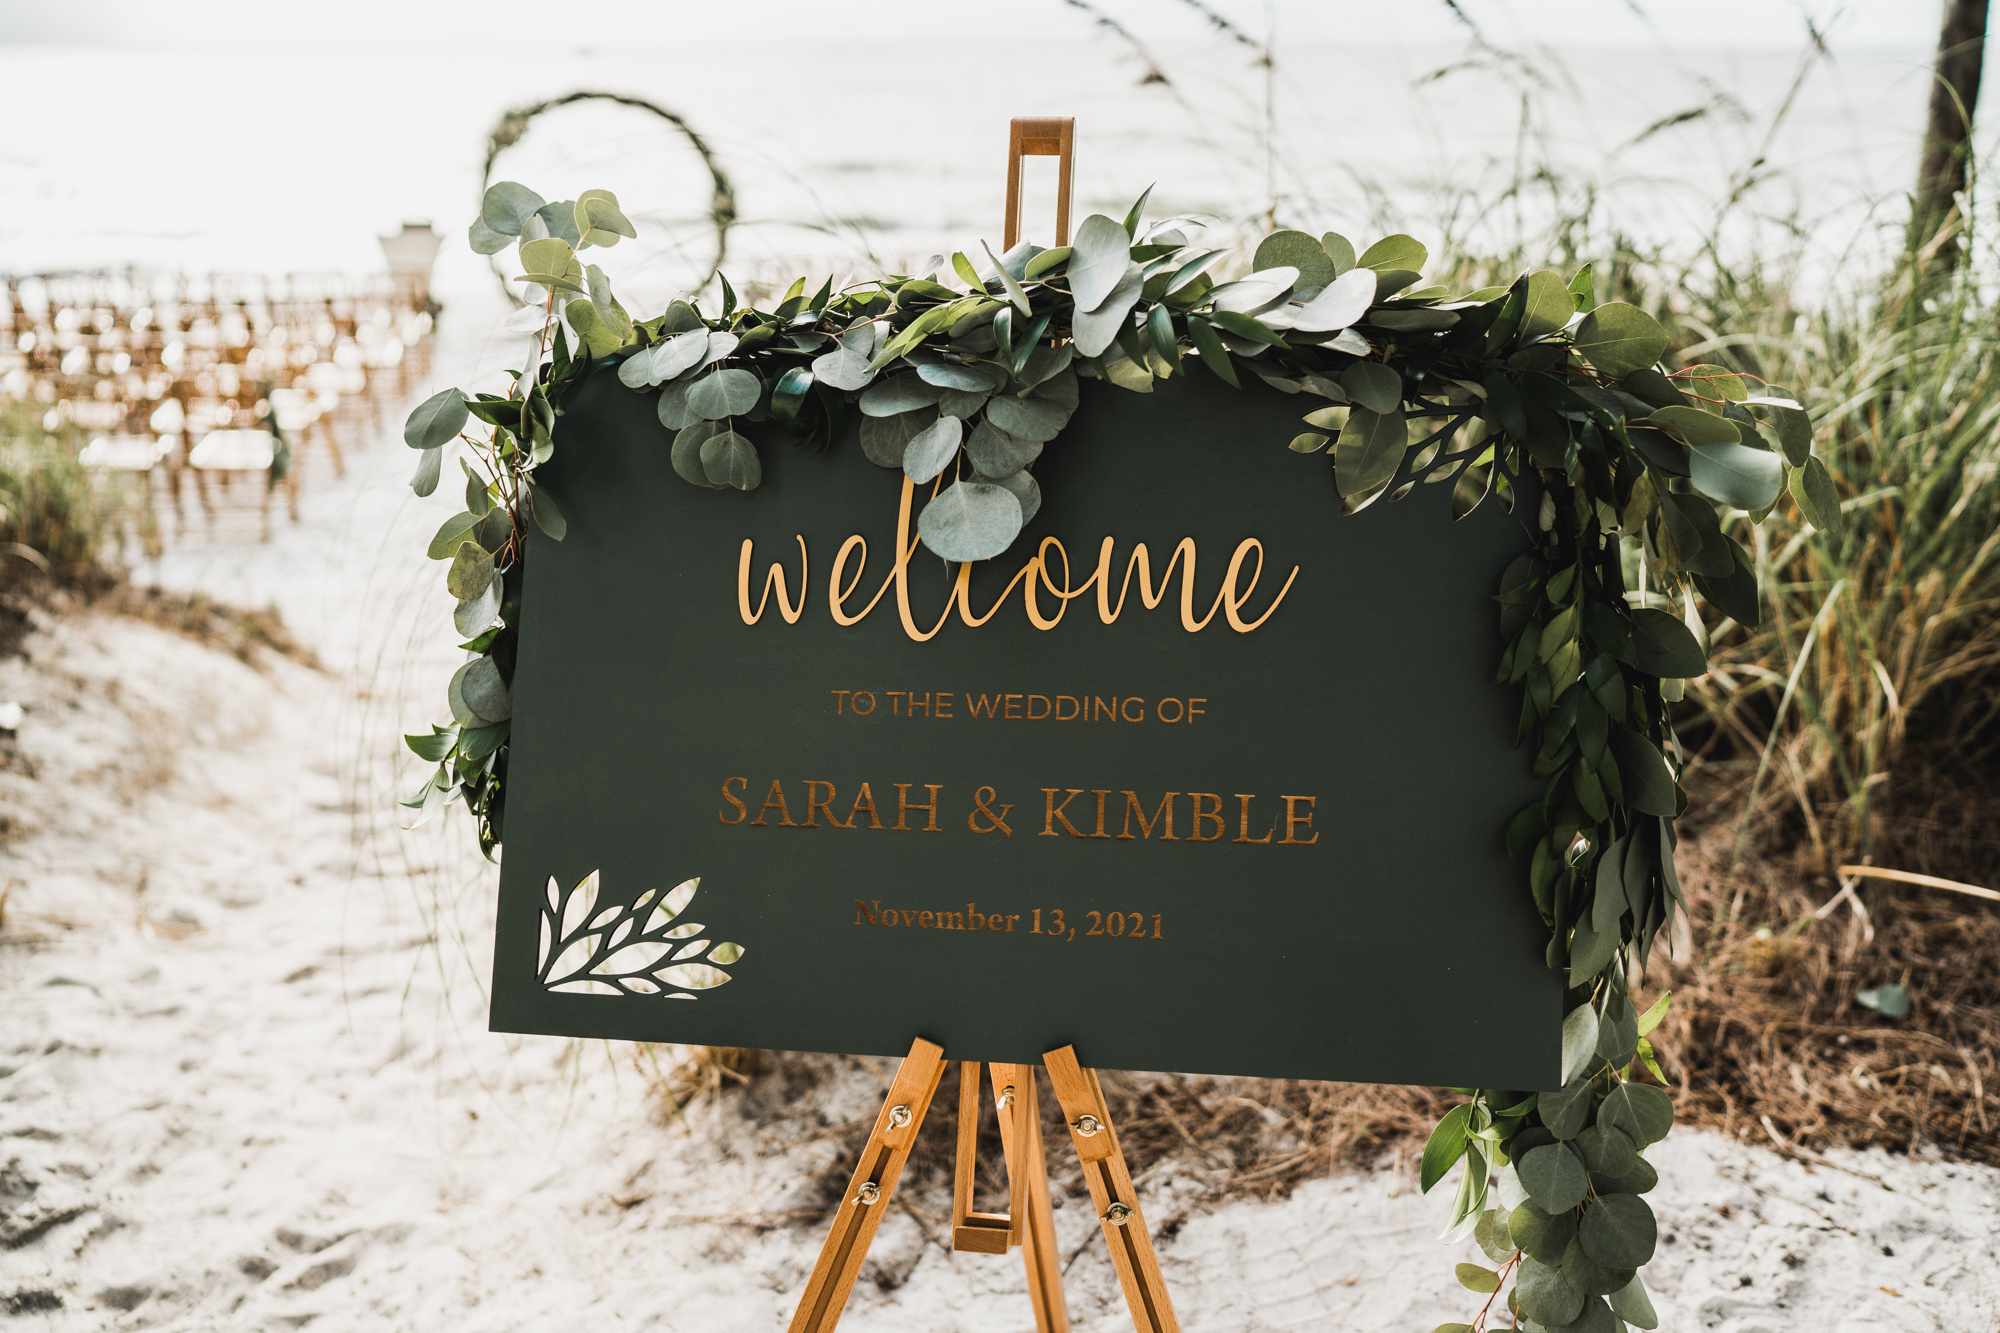 Black and Gold Welcome Wedding Sign with Cascading Eucalyptus Greenery Ceremony Decor Ideas